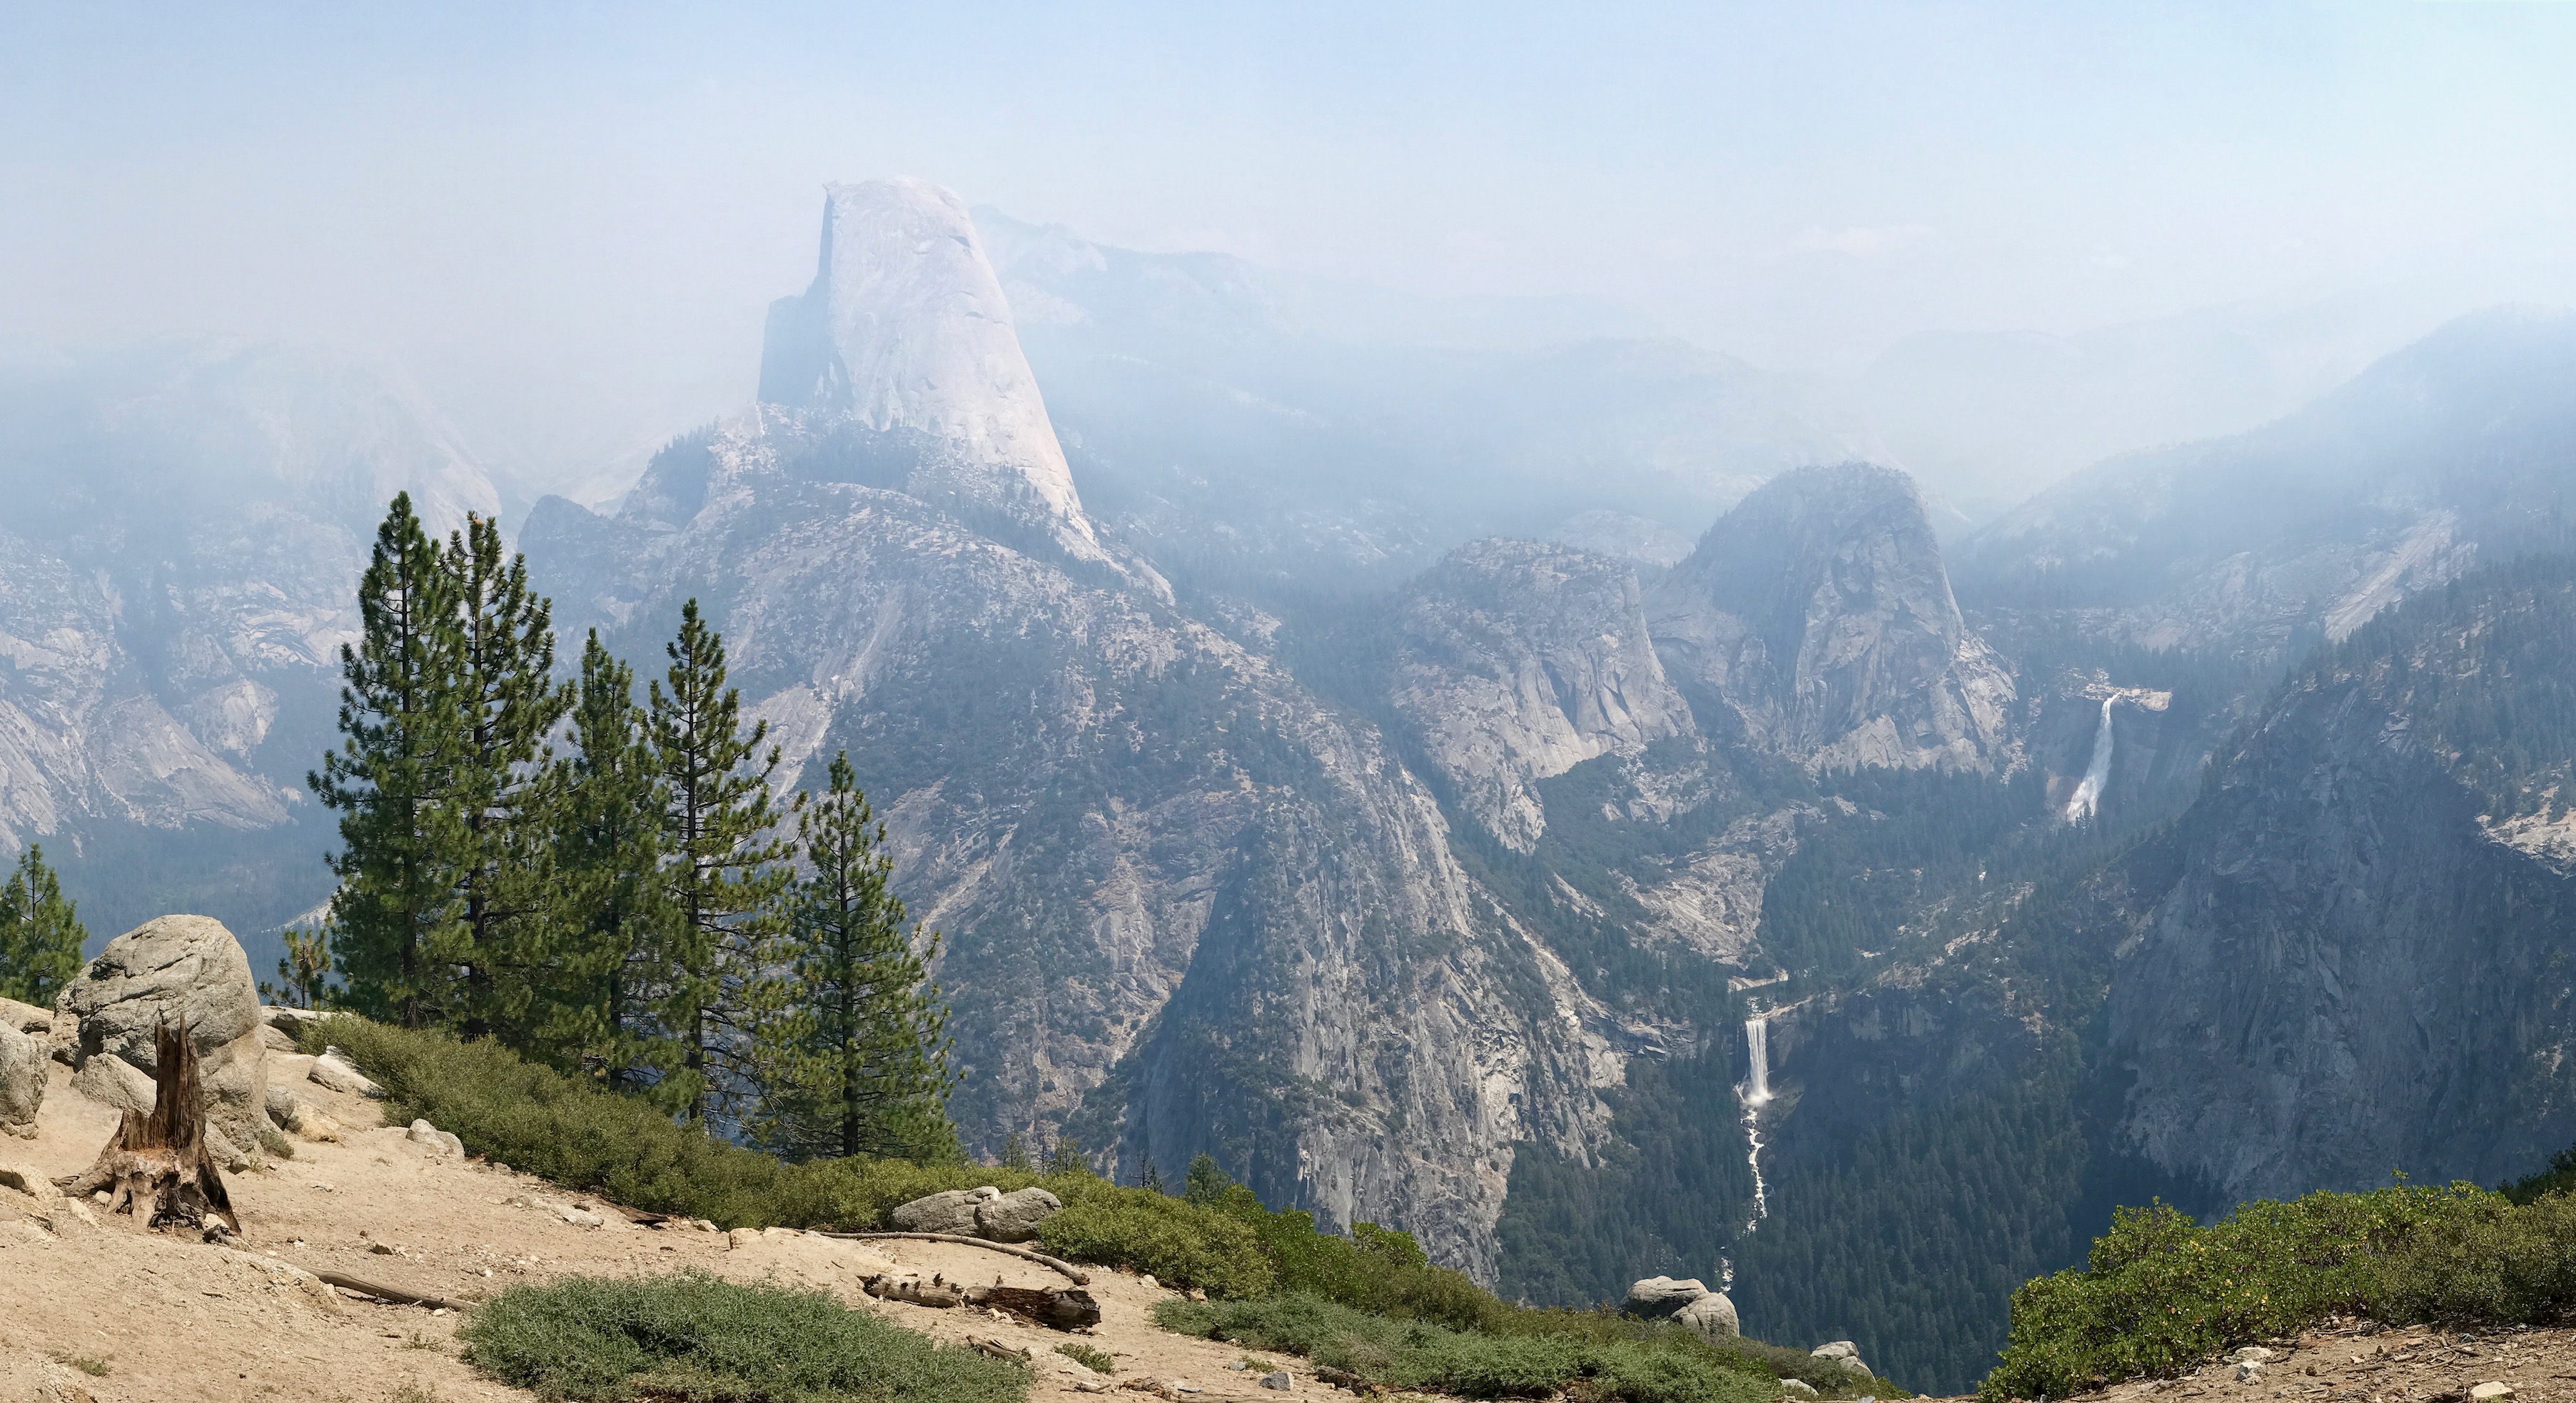 Half Dome as seen from Washburn Point along Glacier Point Road